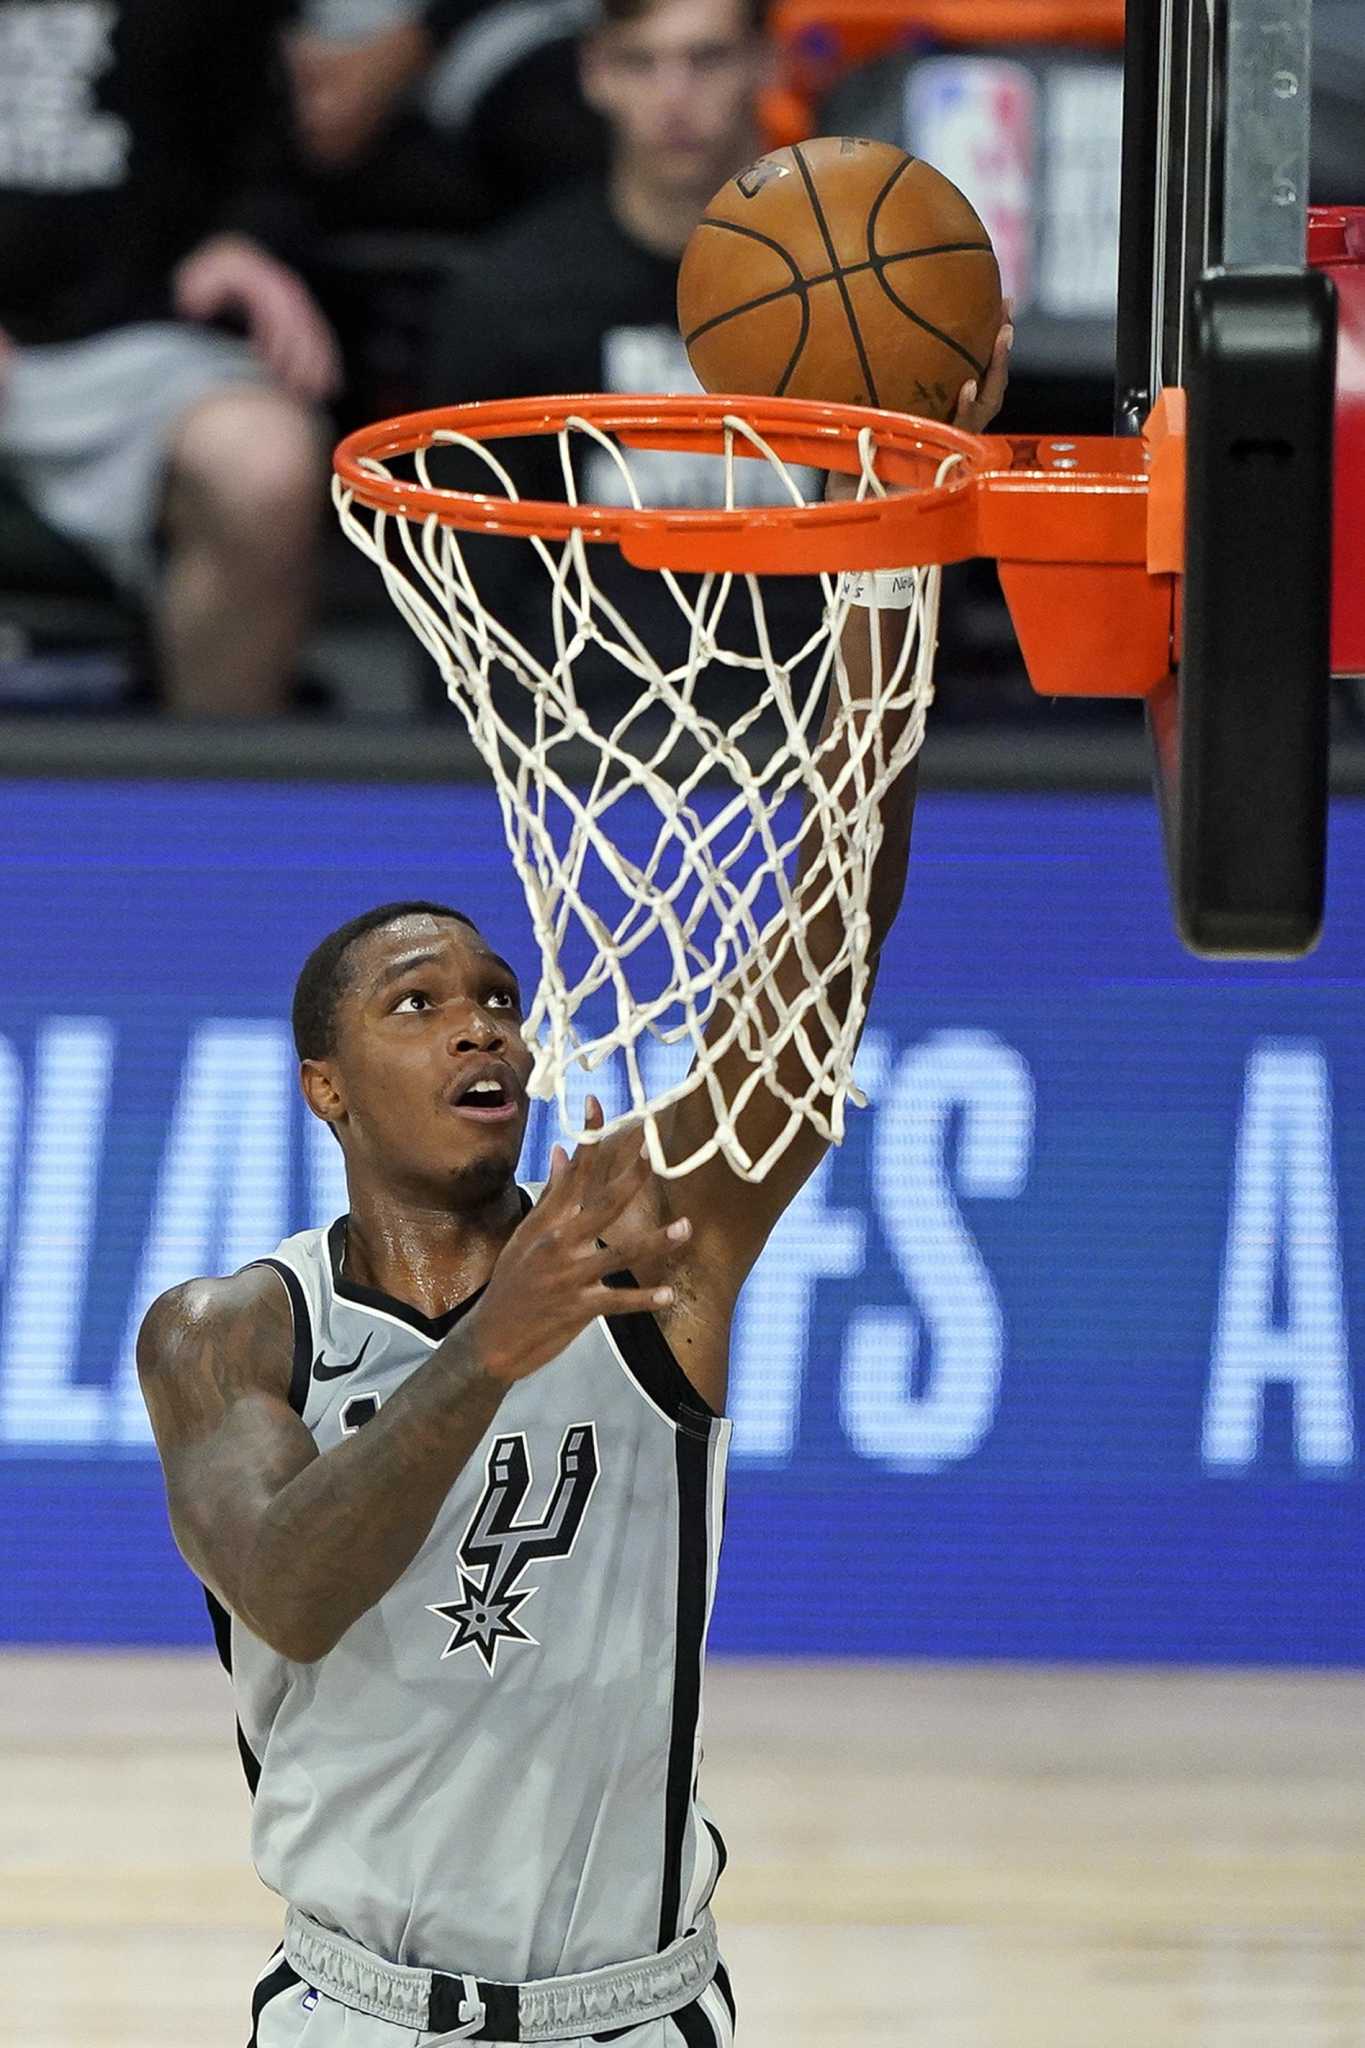 Report: The Spurs have conducted a pre-draft workout with Trey